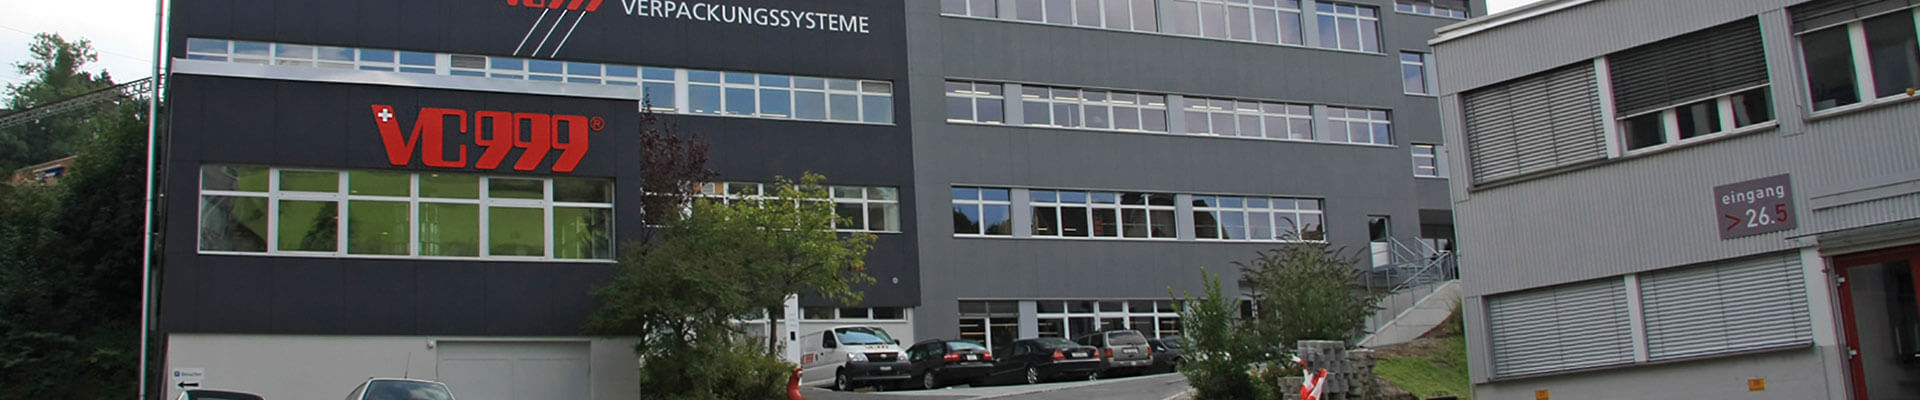 VC999 Verpackungssysteme AG